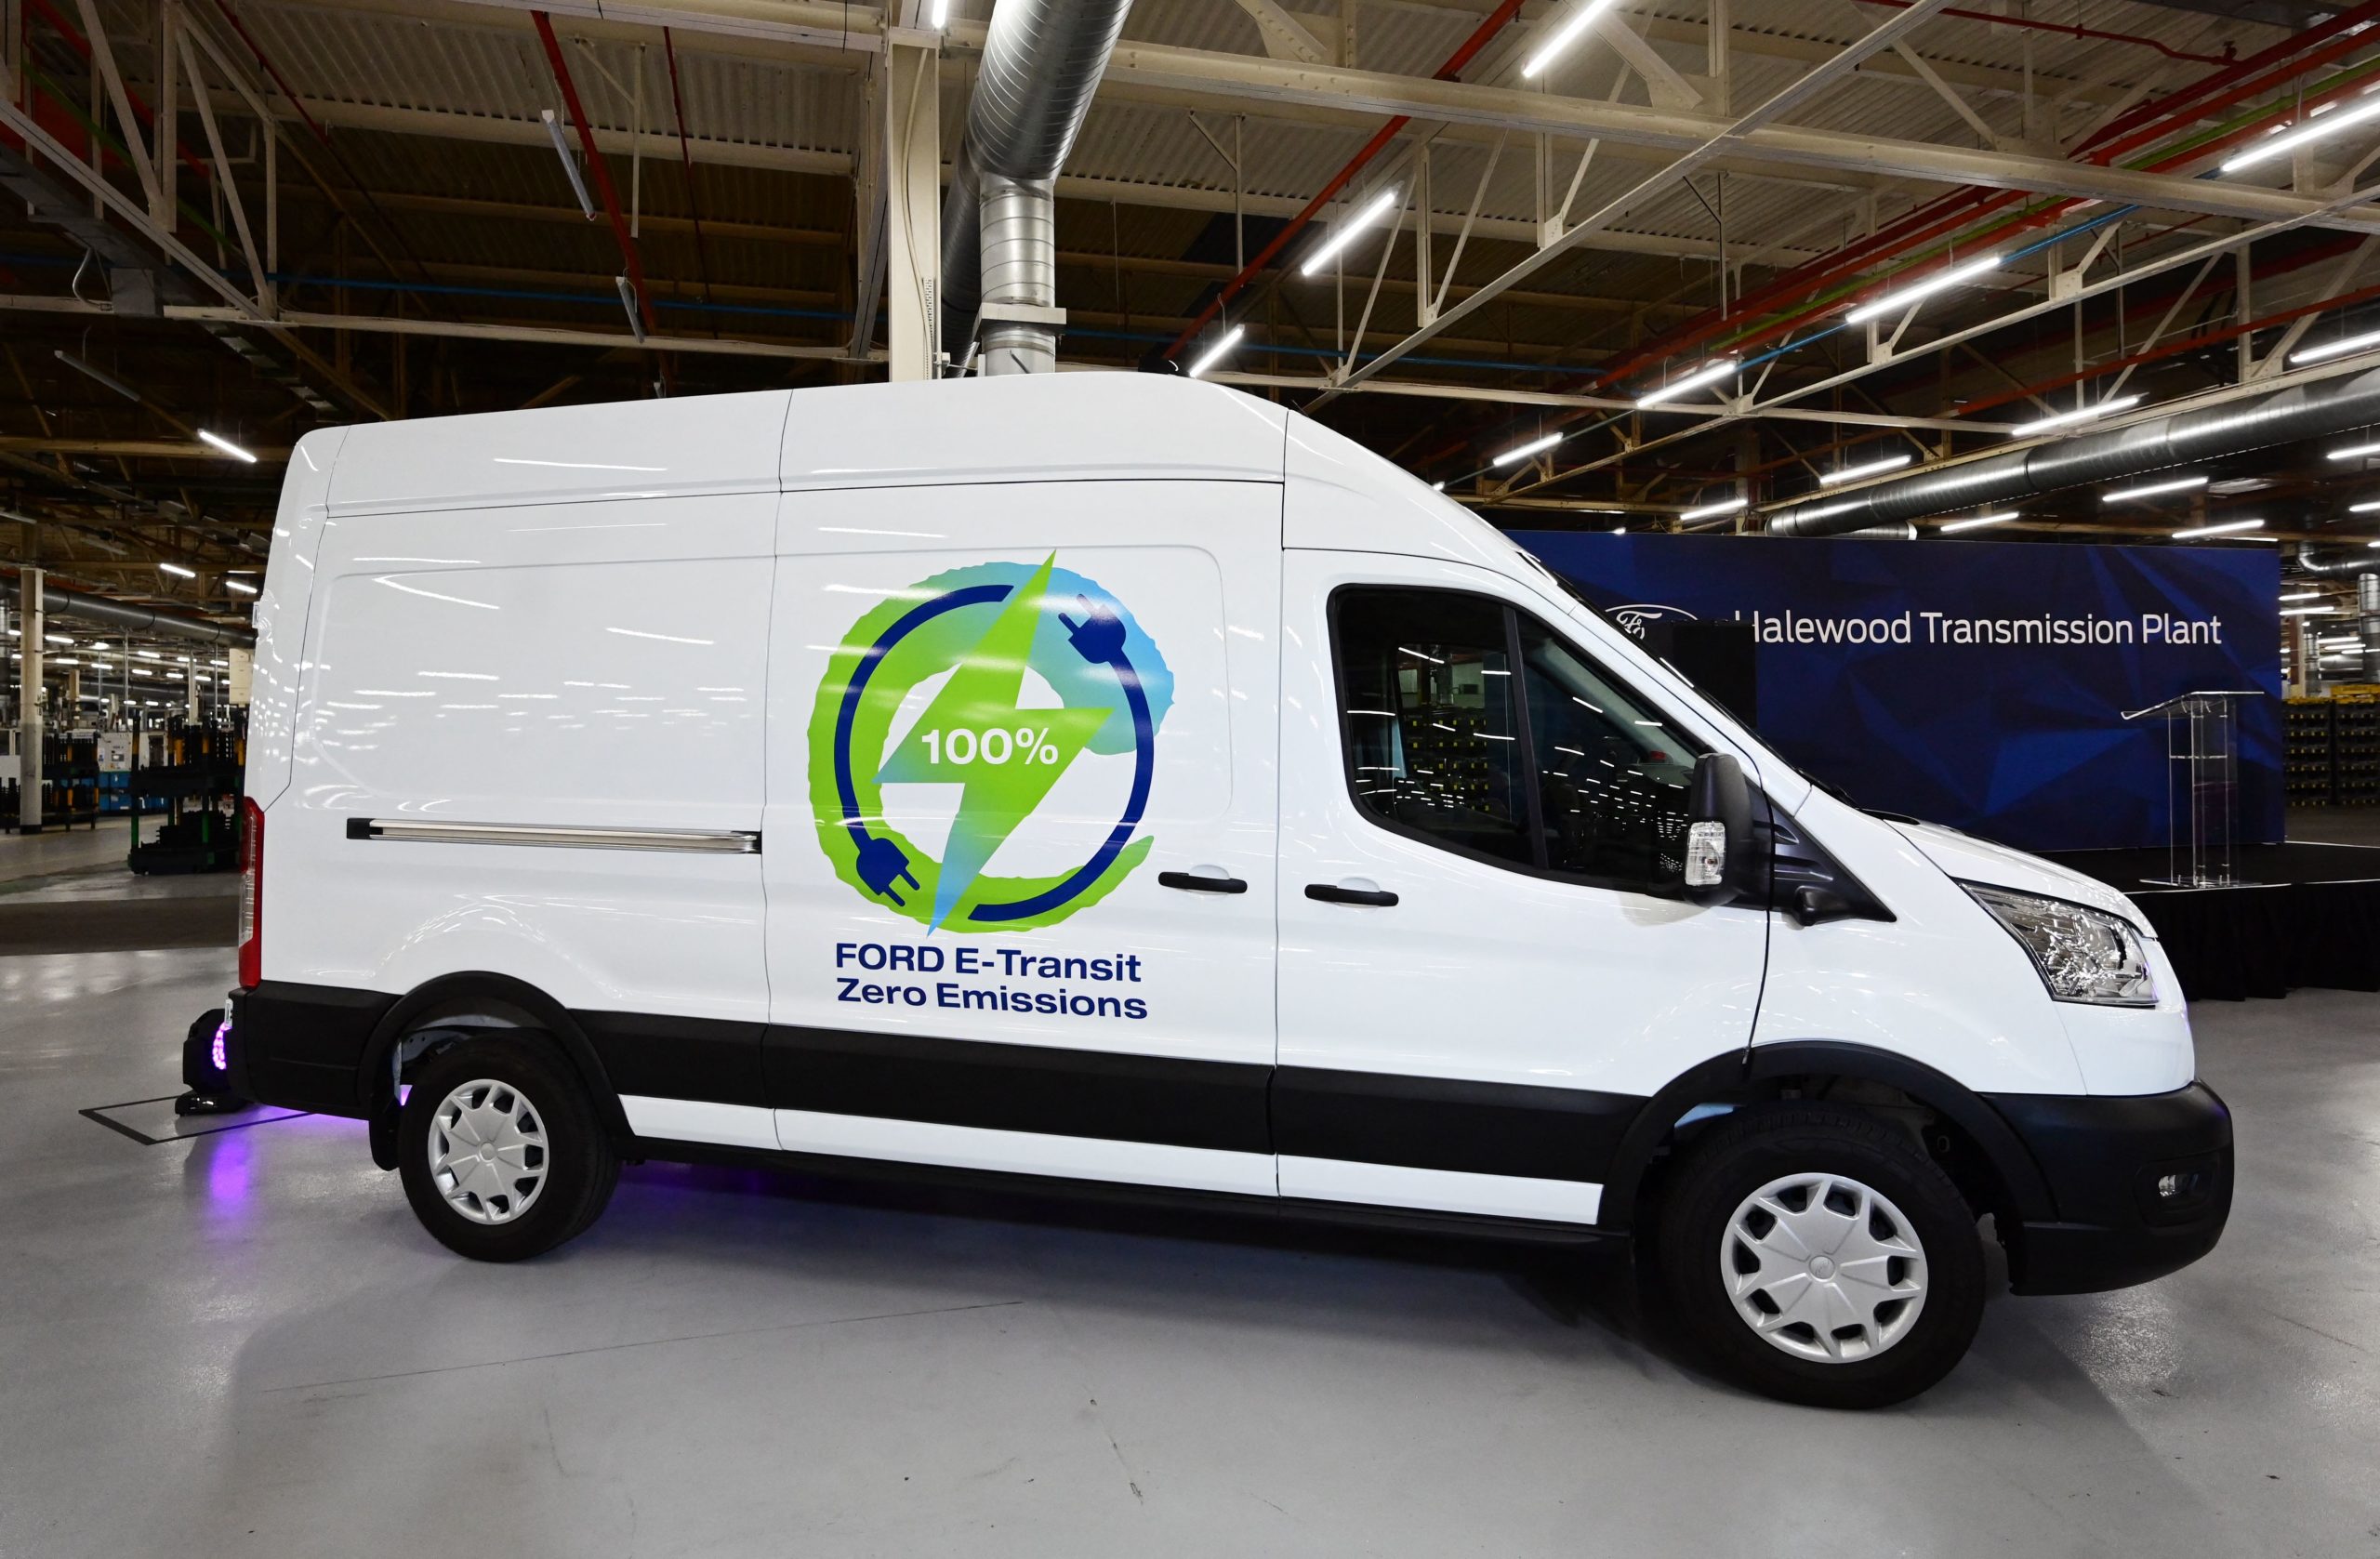 A Ford E-Transit van is seen on display at the Ford Halewood plant in Liverpool, north west England on October 18, 2021. - US auto giant Ford on October 18 unveiled plans to convert a UK factory into its first electric vehicle component assembly site in Europe. Ford will invest £230 million ($316 million, 273 million euros) in its Halewood plant on Merseyside in northwest England, the carmaker said. (Photo by PAUL ELLIS/AFP via Getty Images)